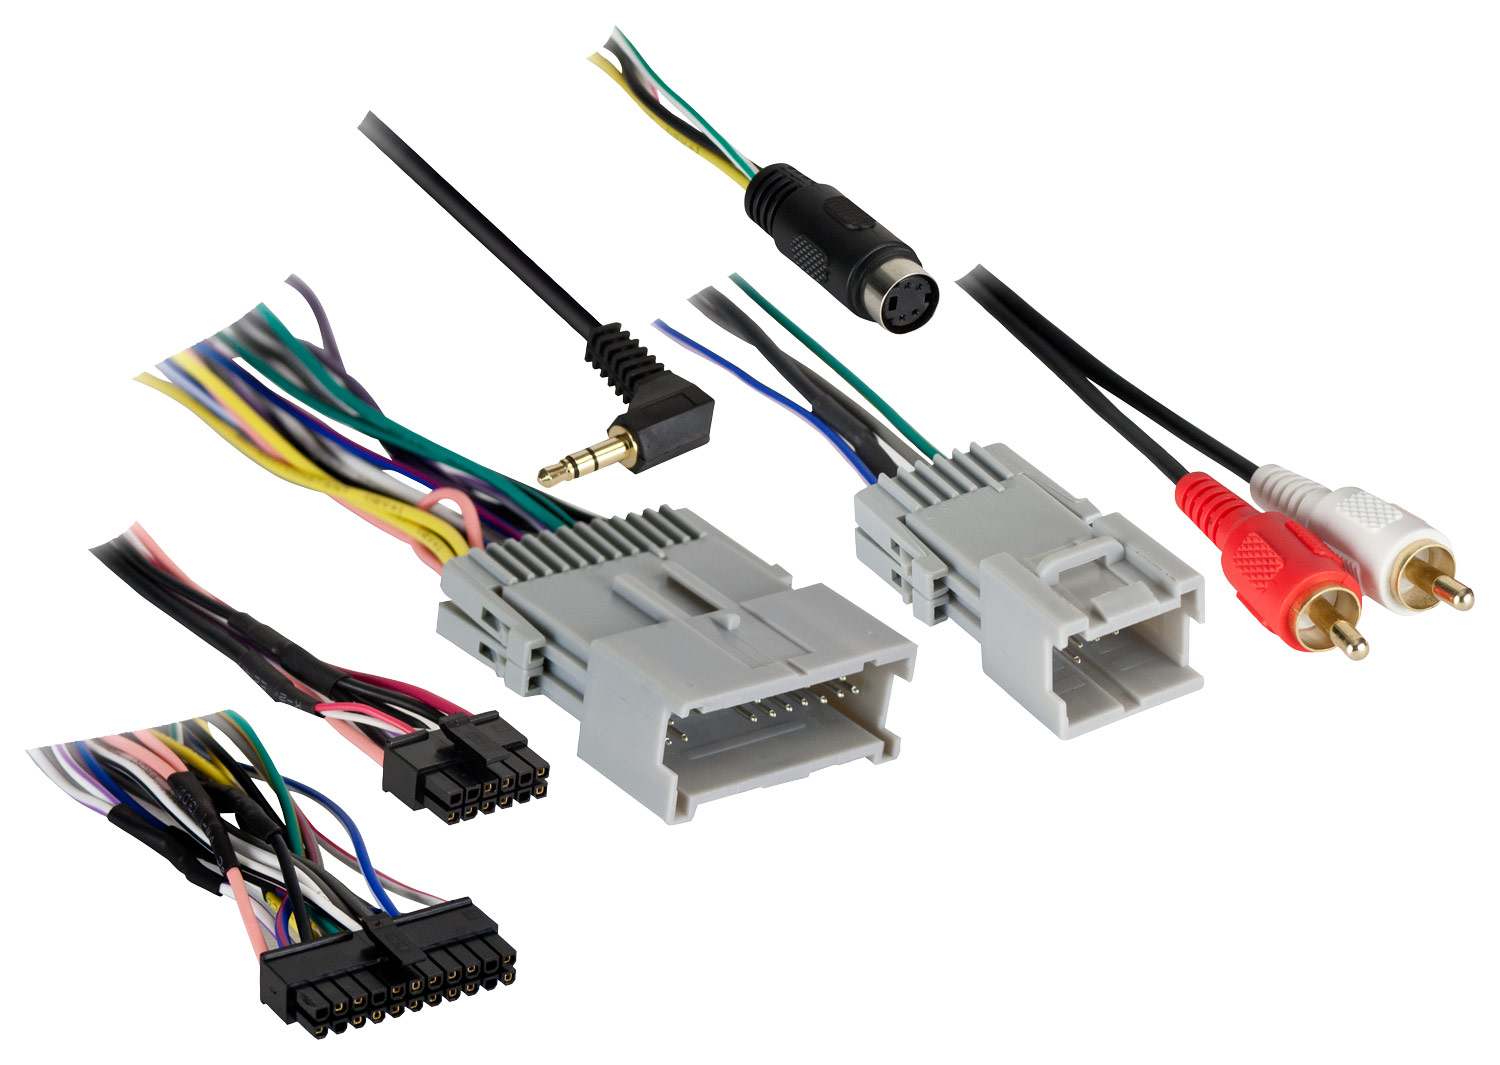 Metra - Axxess ADBOX Data Interface Harness for Select Vehicles - Multicolor was $49.99 now $37.49 (25.0% off)